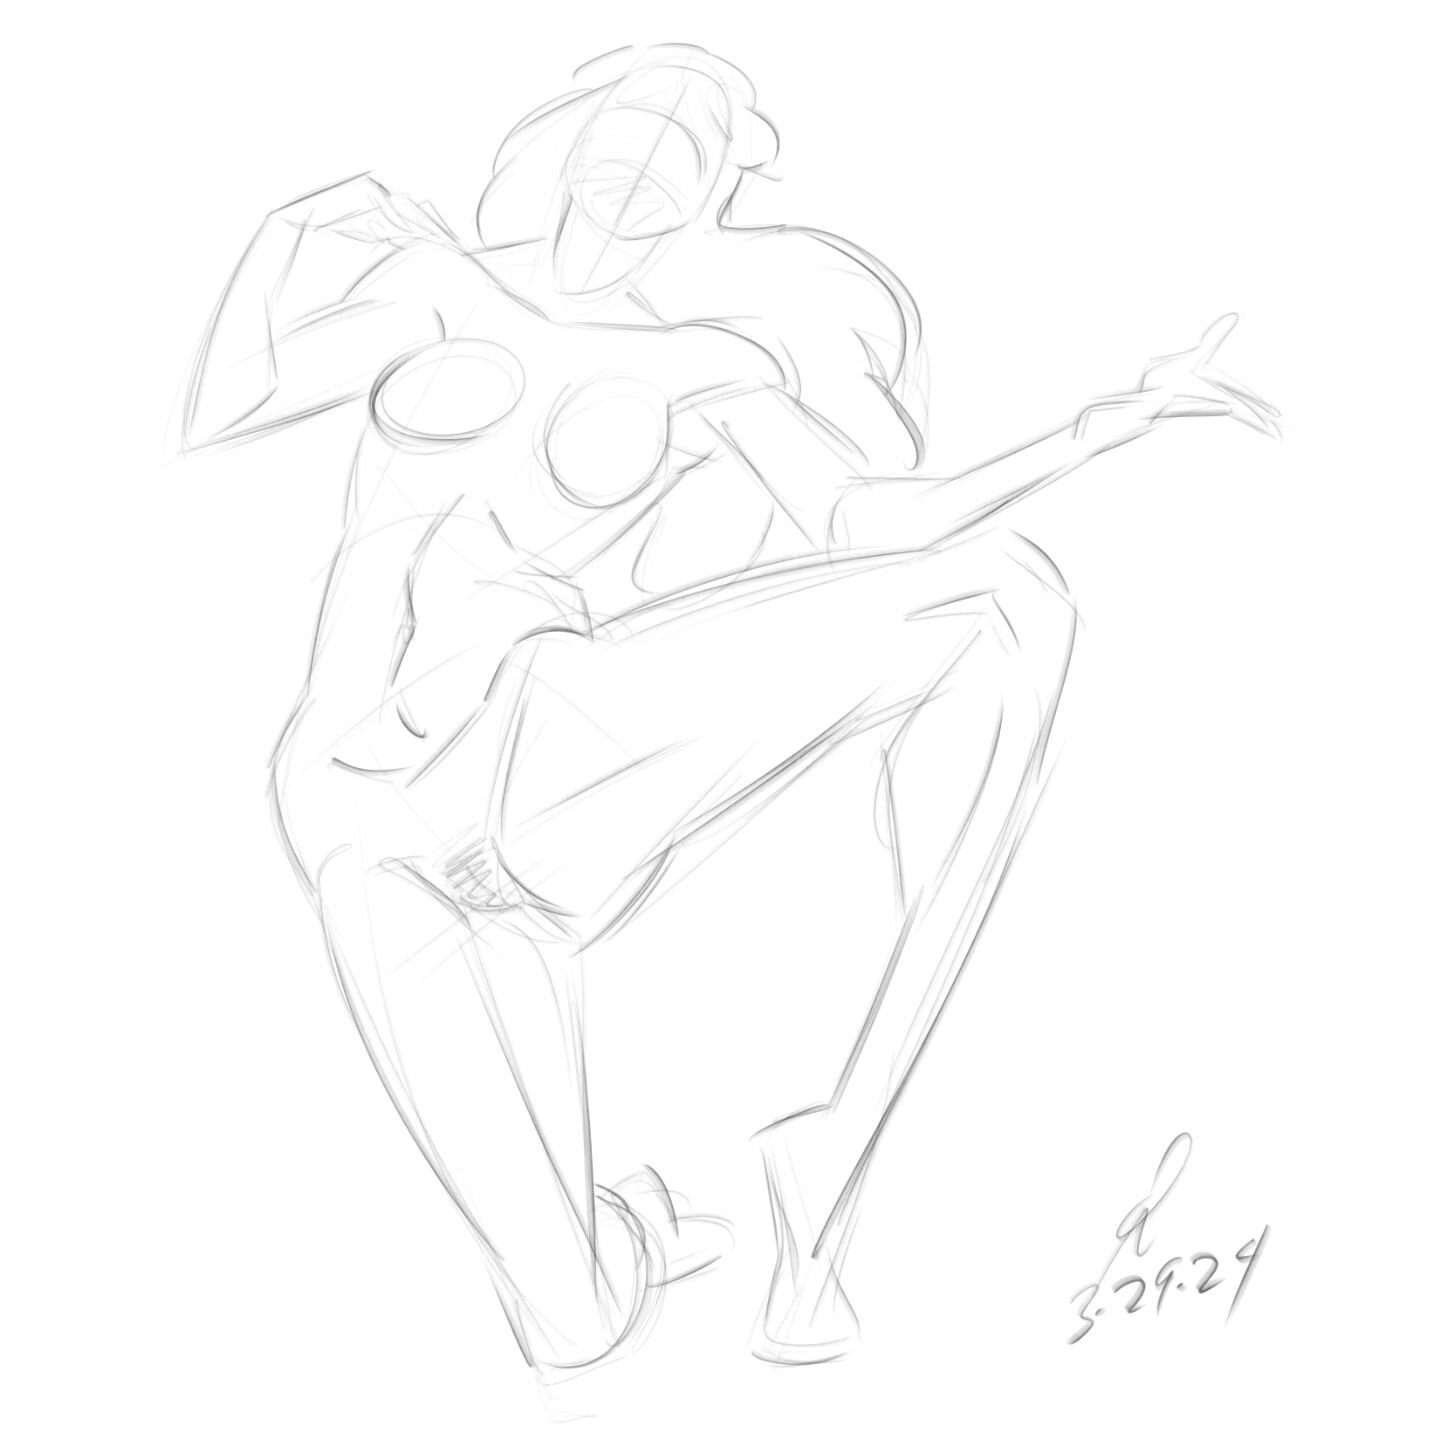 Short poses of @sofiaartmodel during her first self hosted session. Fantastic poses from start to finish from Sofia. #drawing #drawfromlife #lifedrawing #digitalart #sketches #sketch #photoshop